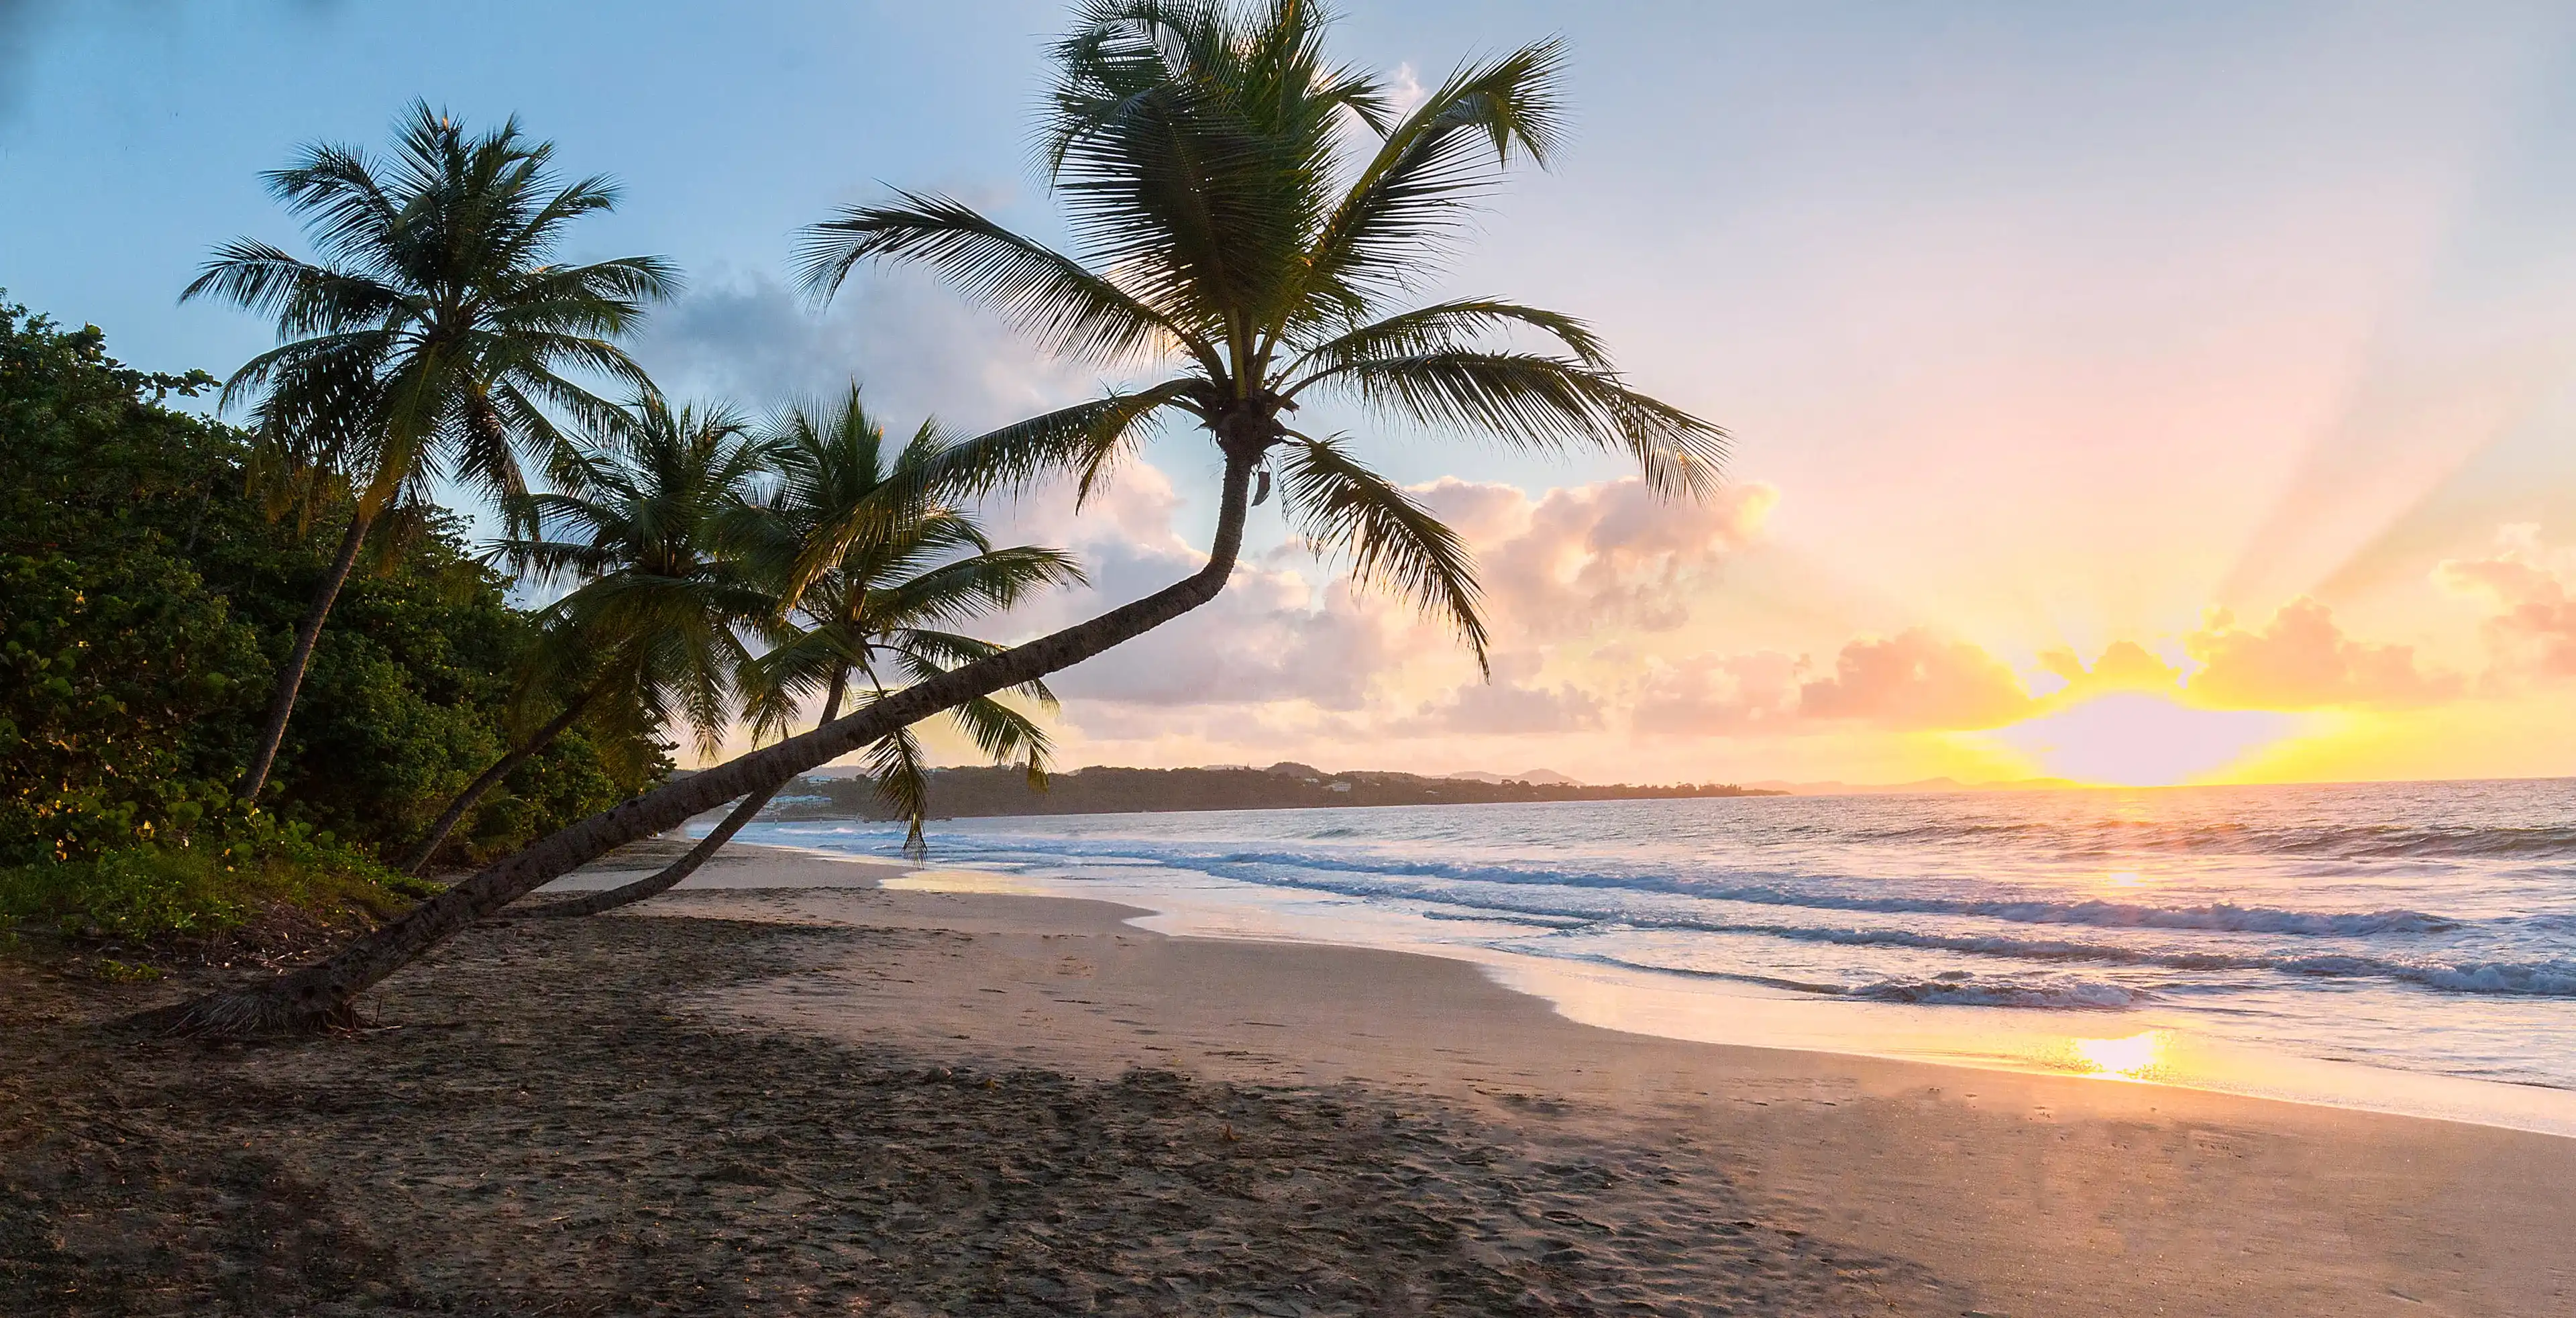 Sunset, paradise beach and palm tree, Martinique island, French West Indies.